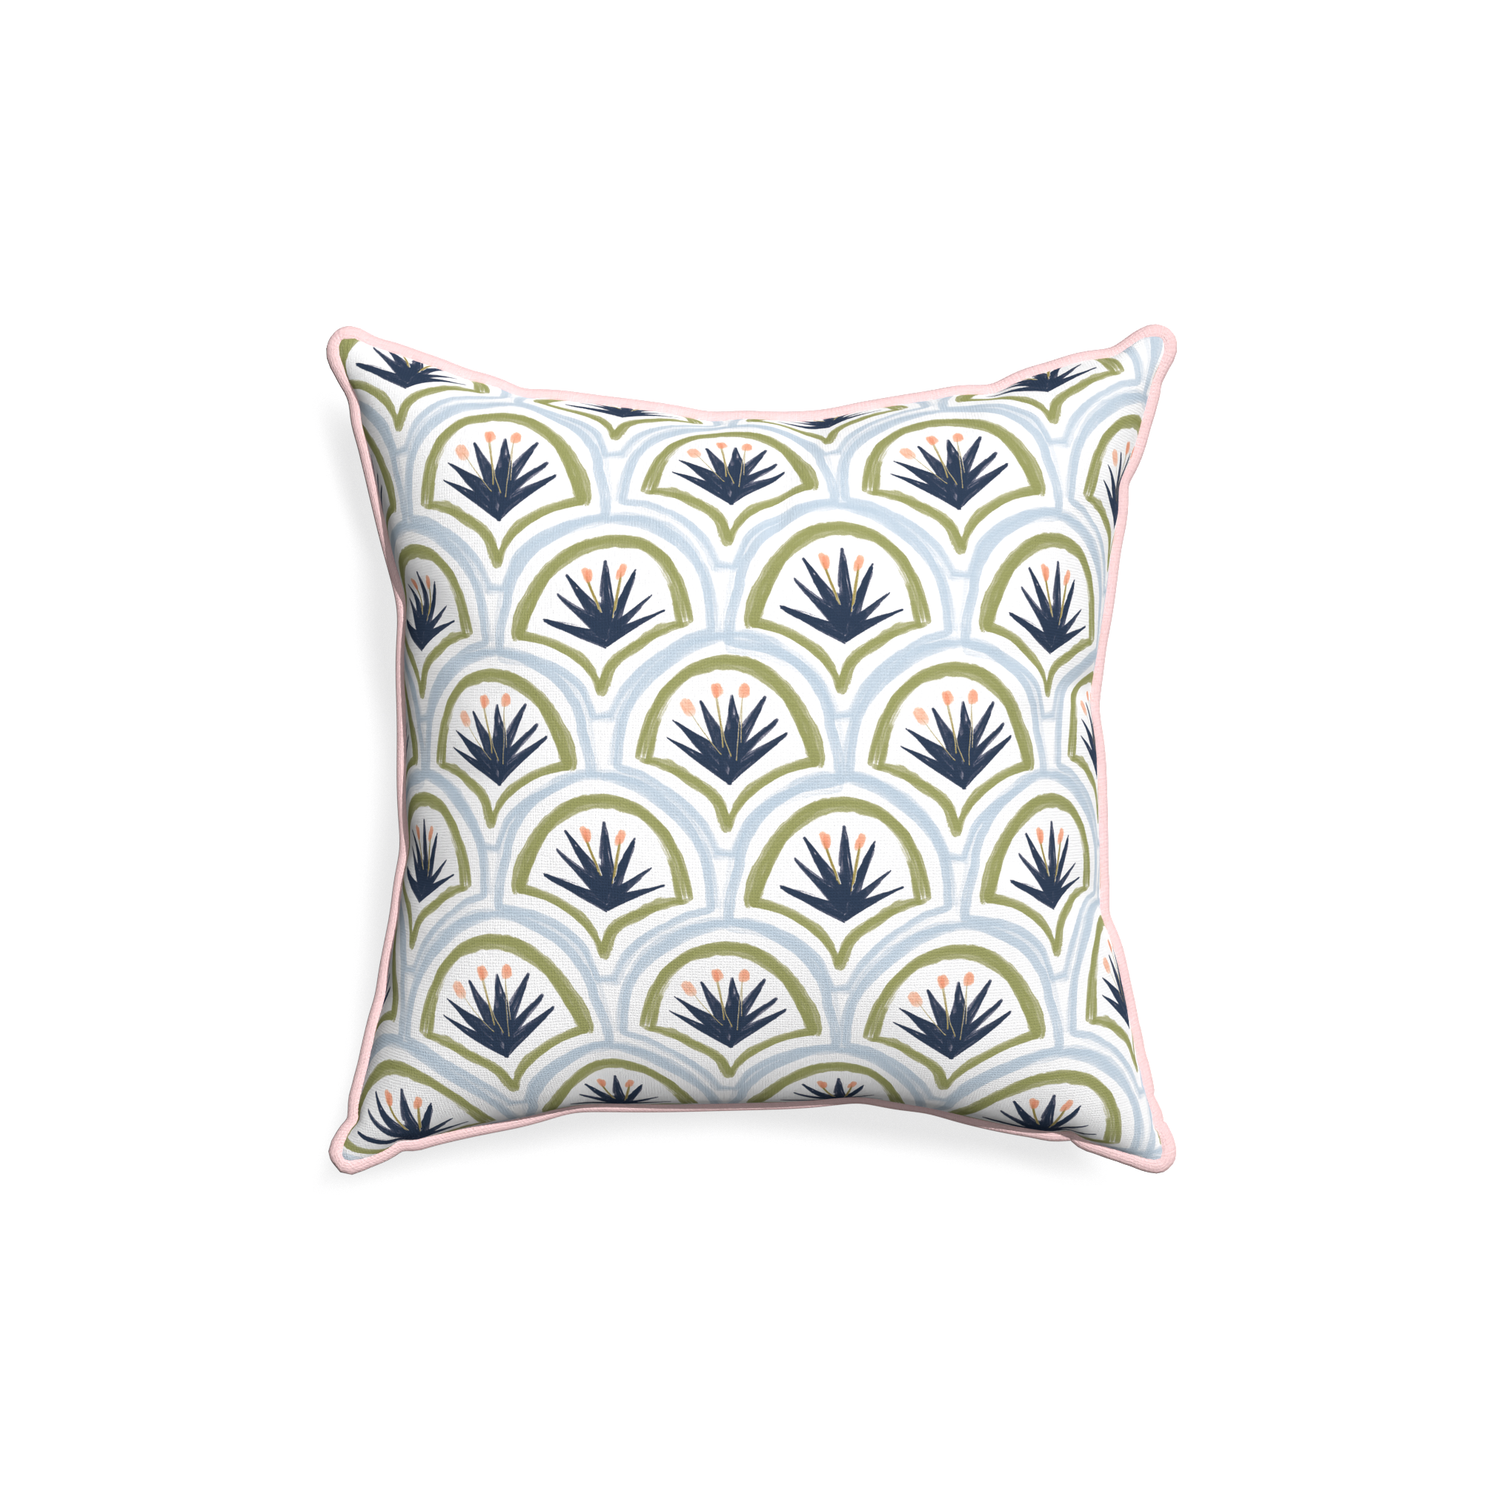 18-square thatcher midnight custom art deco palm patternpillow with petal piping on white background